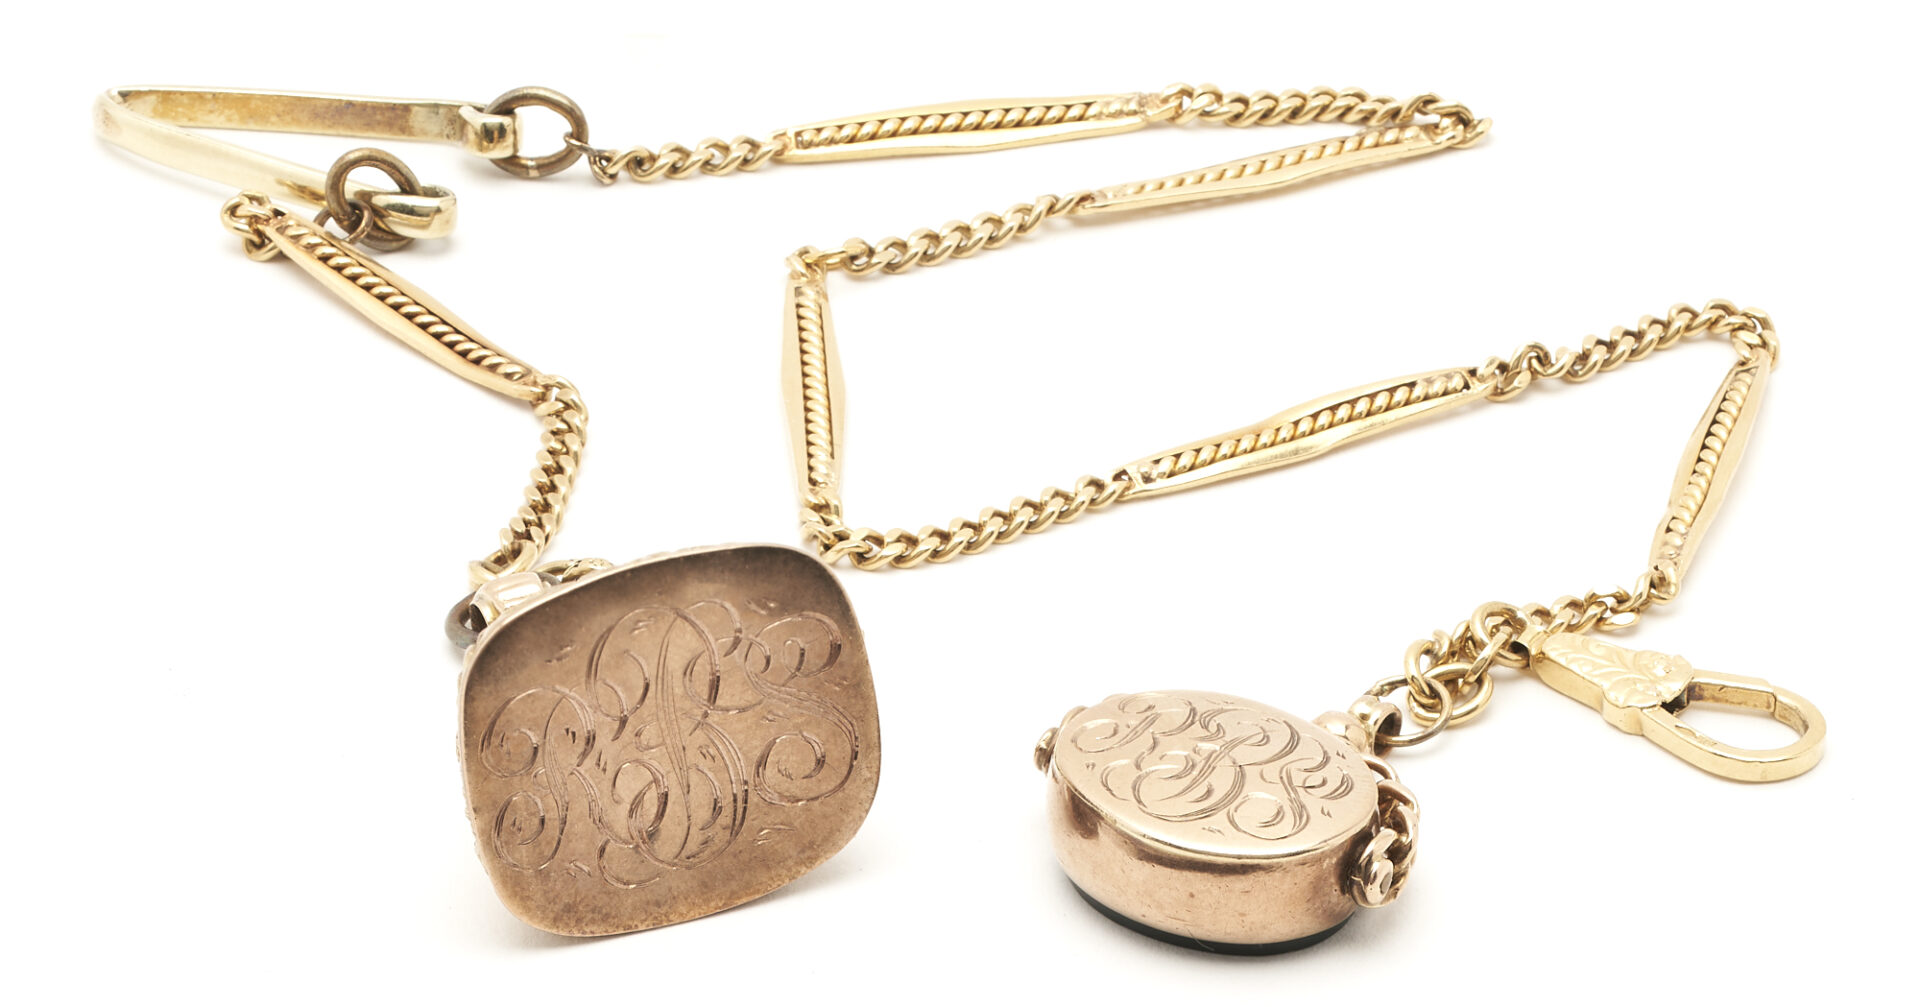 Lot 232: Gold Pocket Watch Chain with Fob & Stamp